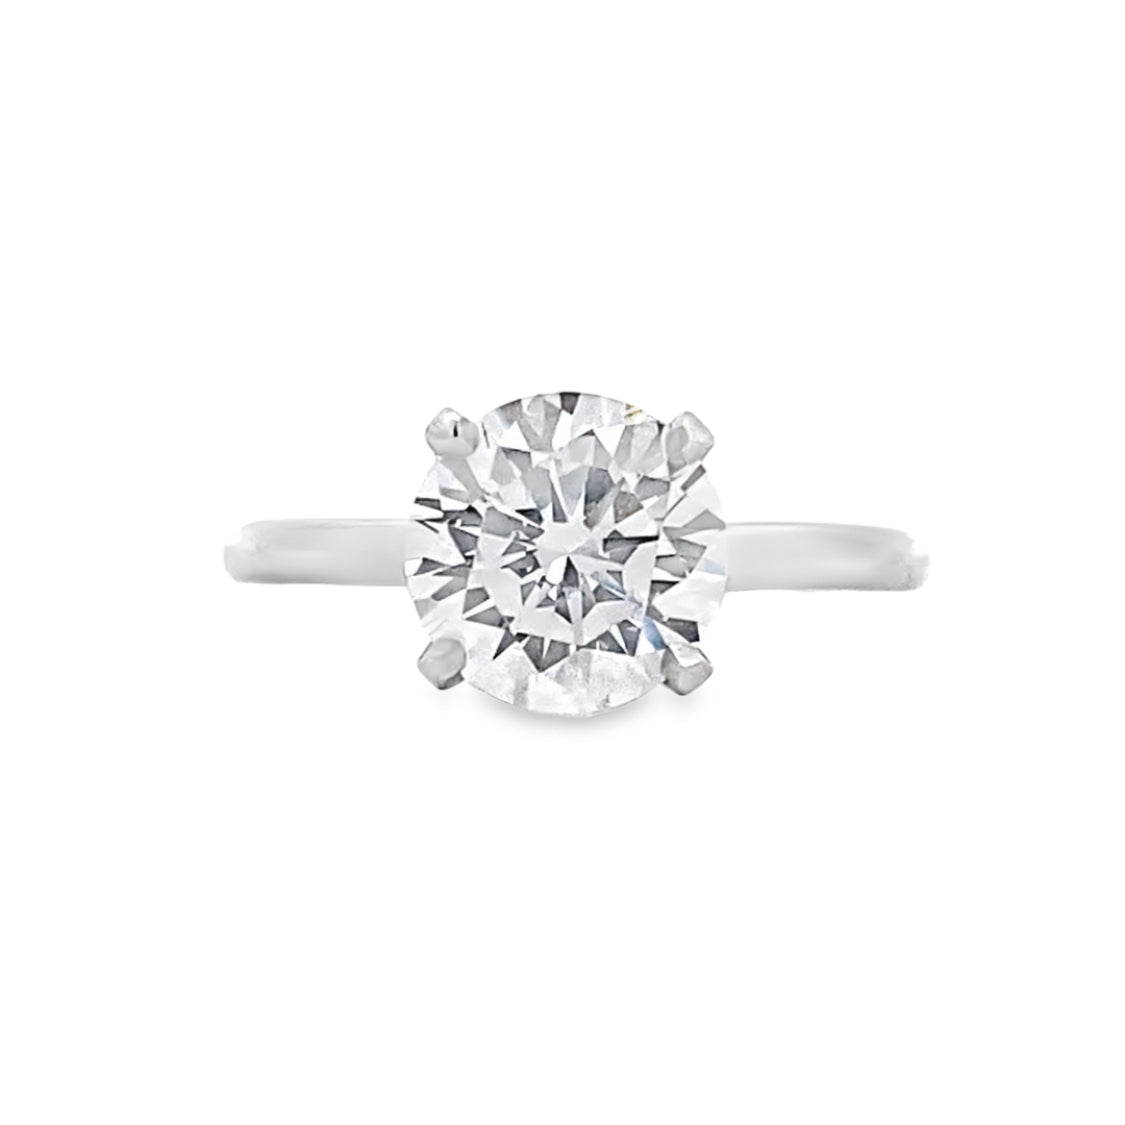 Beeghly & Co. Platinum Solitaire Diamond Engagement Ring BCR-AS-Solitiare